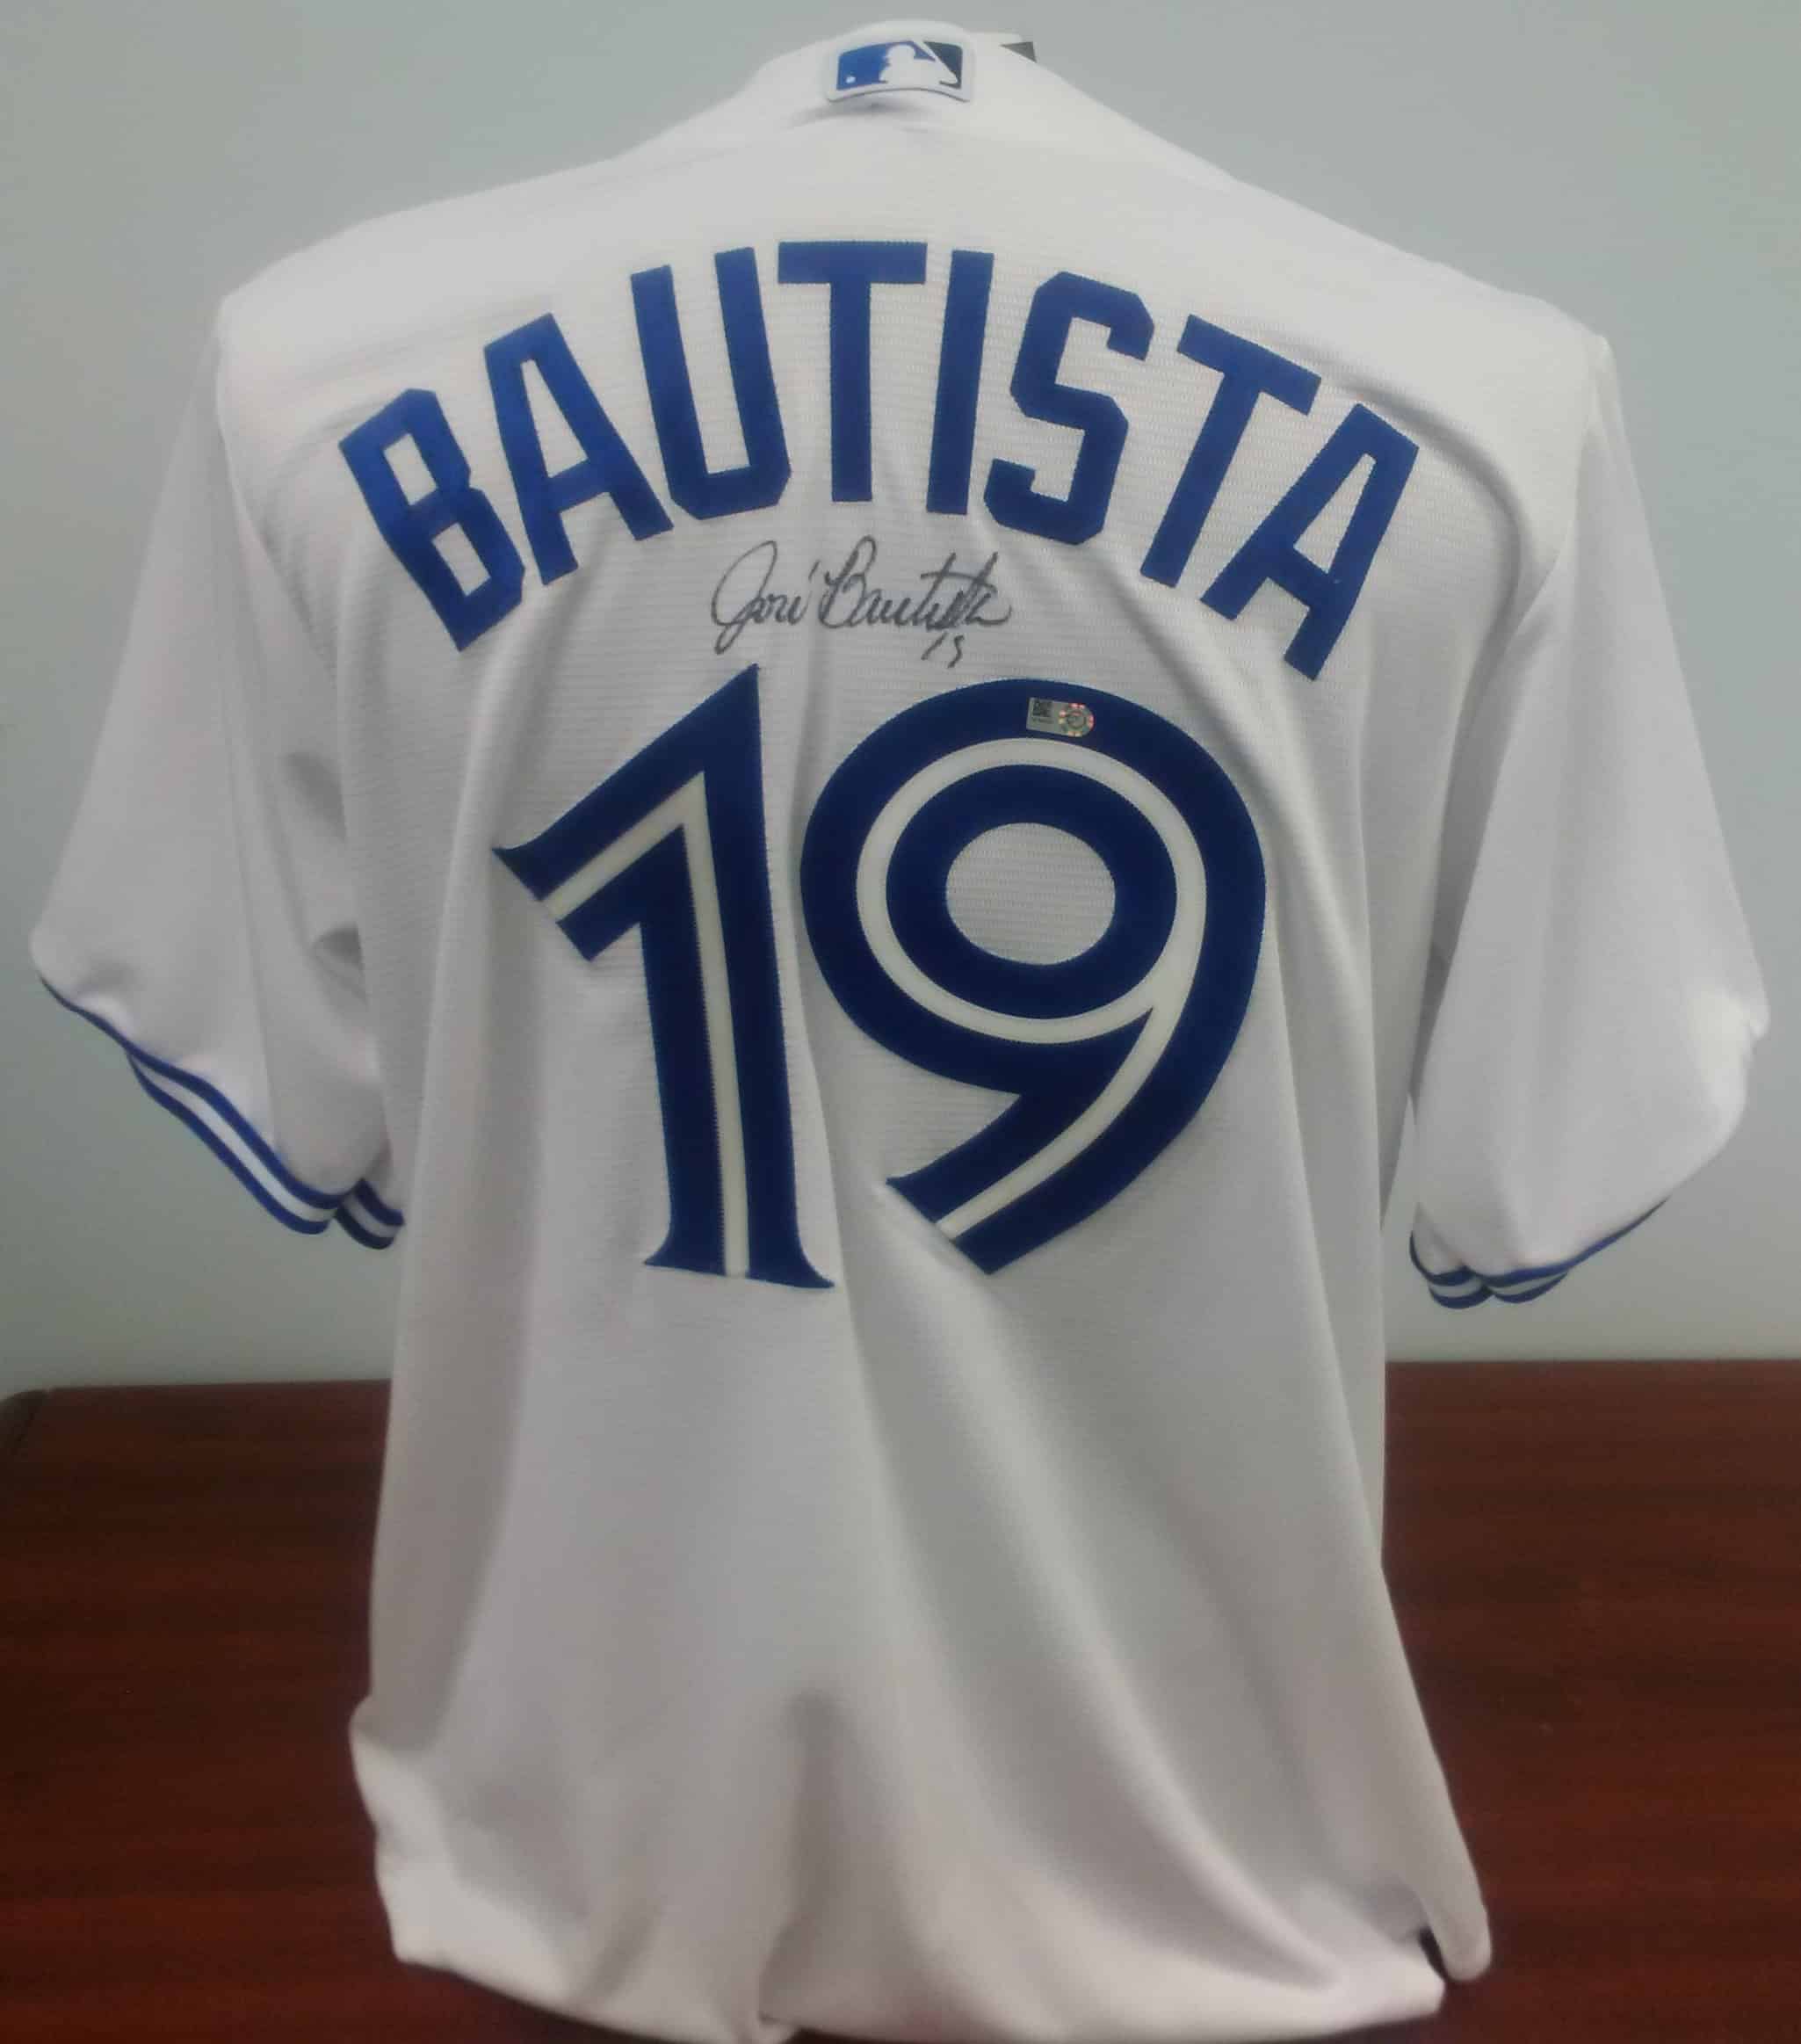 bautista signed jersey